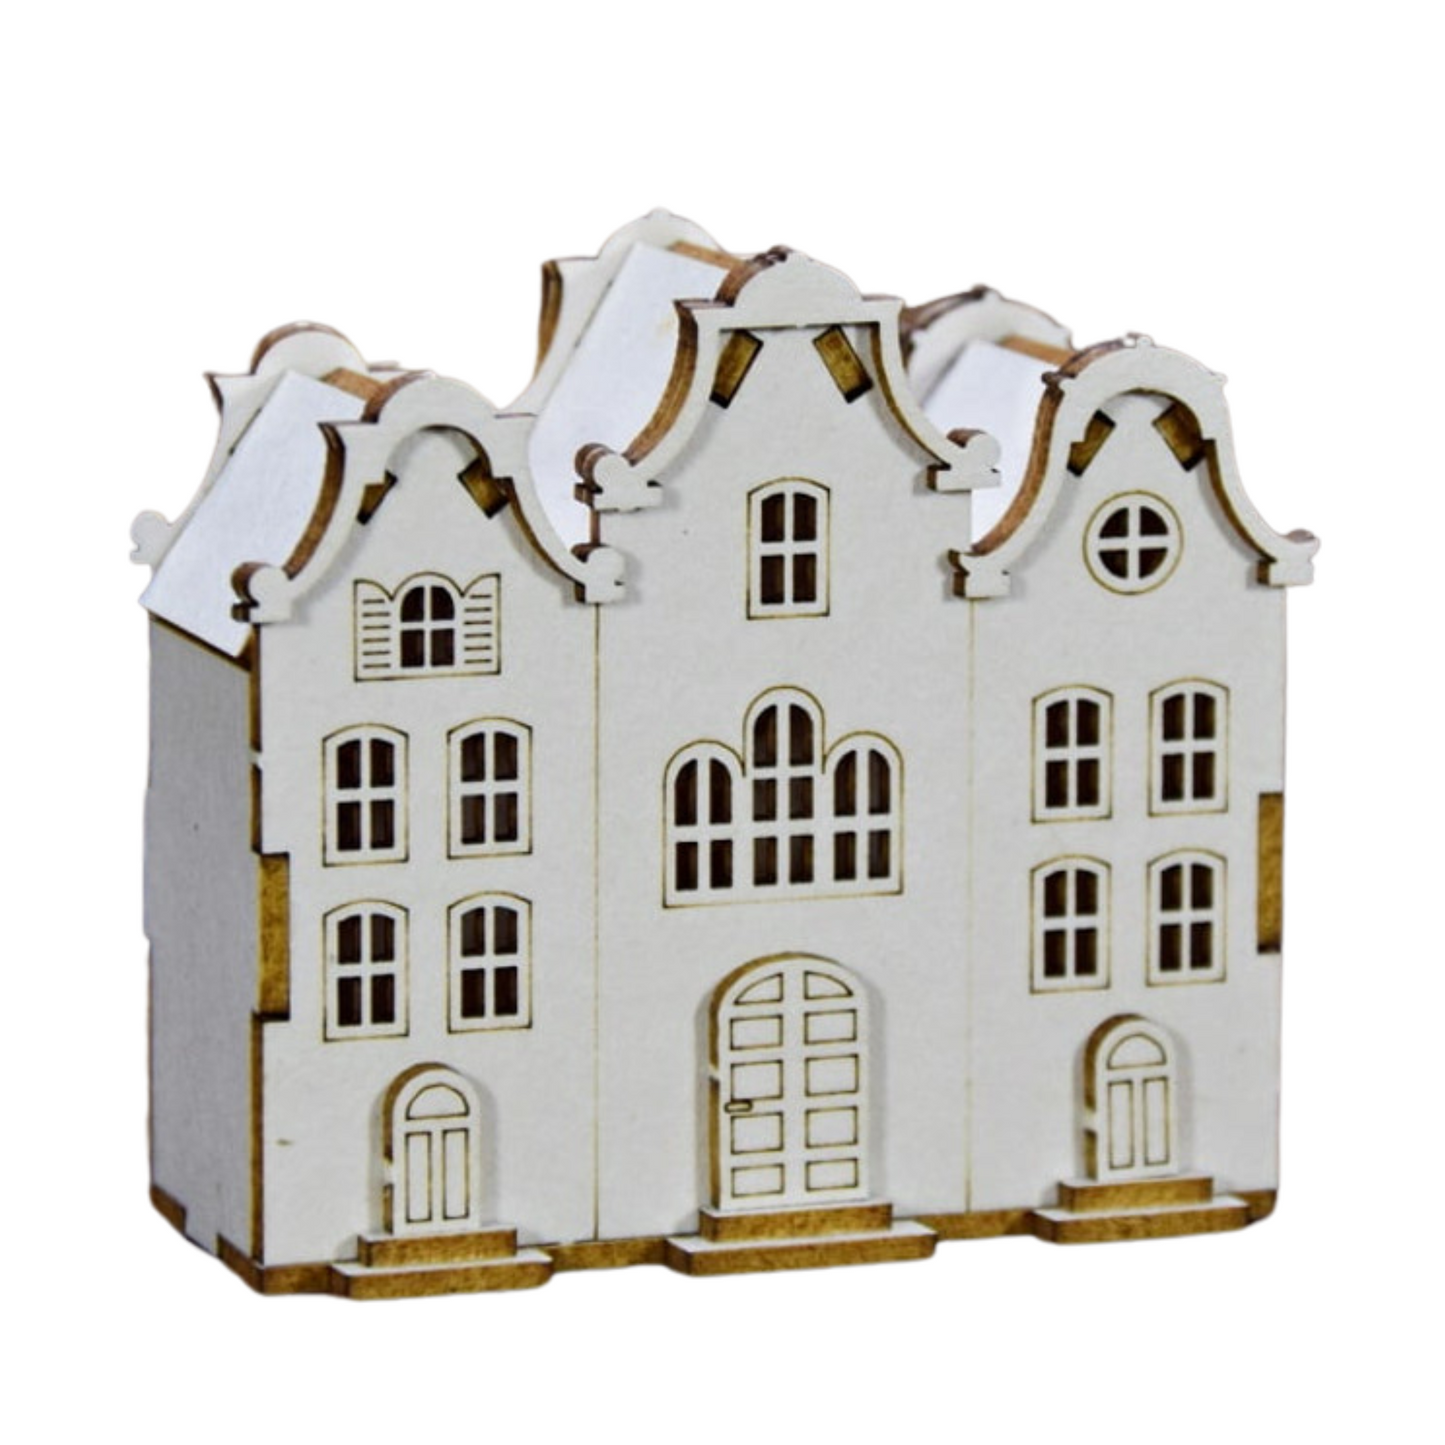 "Tenement House #10" from the Little House Collection by Snipart. Available at Milton's daughter.